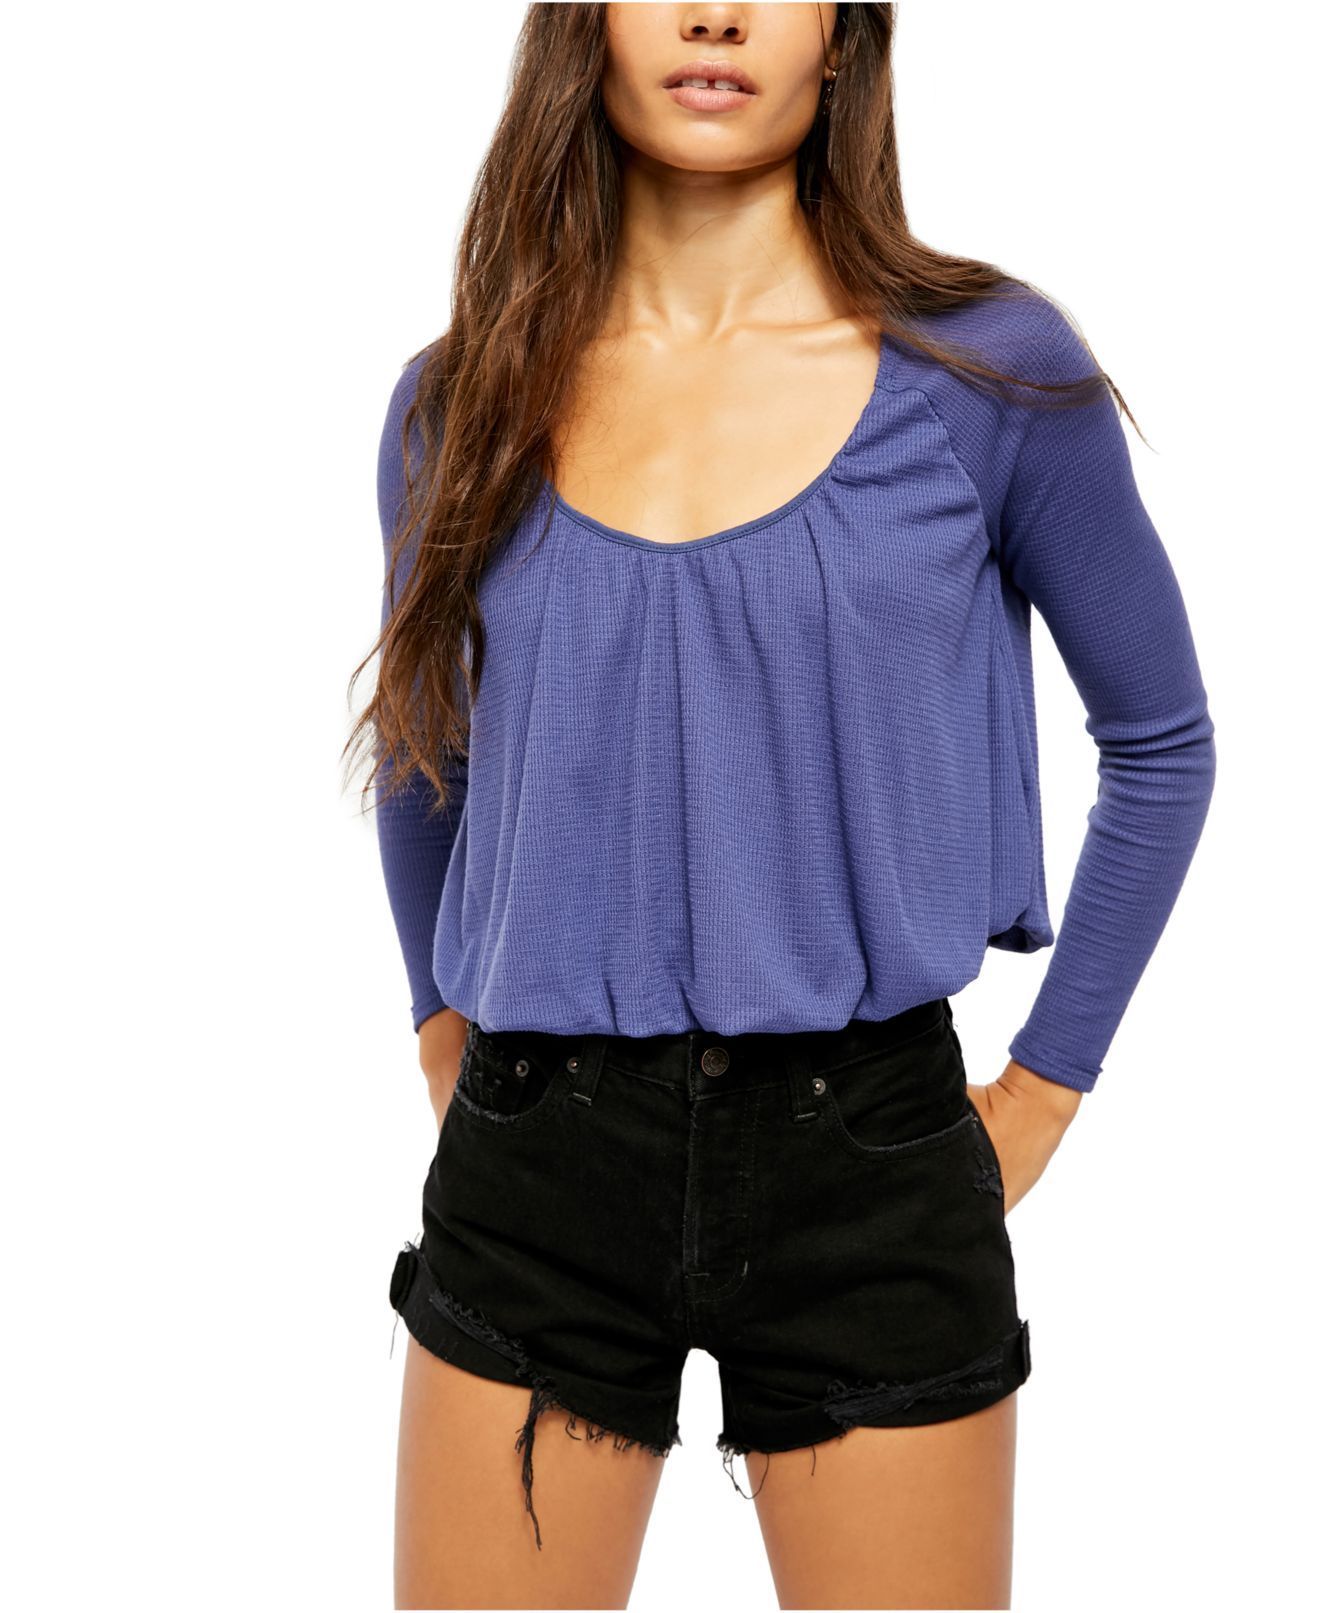 Color: Blues Size Type: Regular Size (Women's): XS Sleeve Length: Long Sleeve Type: Blouse Style: Knit Top Neckline: V-Neck Pattern: Solid Theme: Modern Material: Polyester